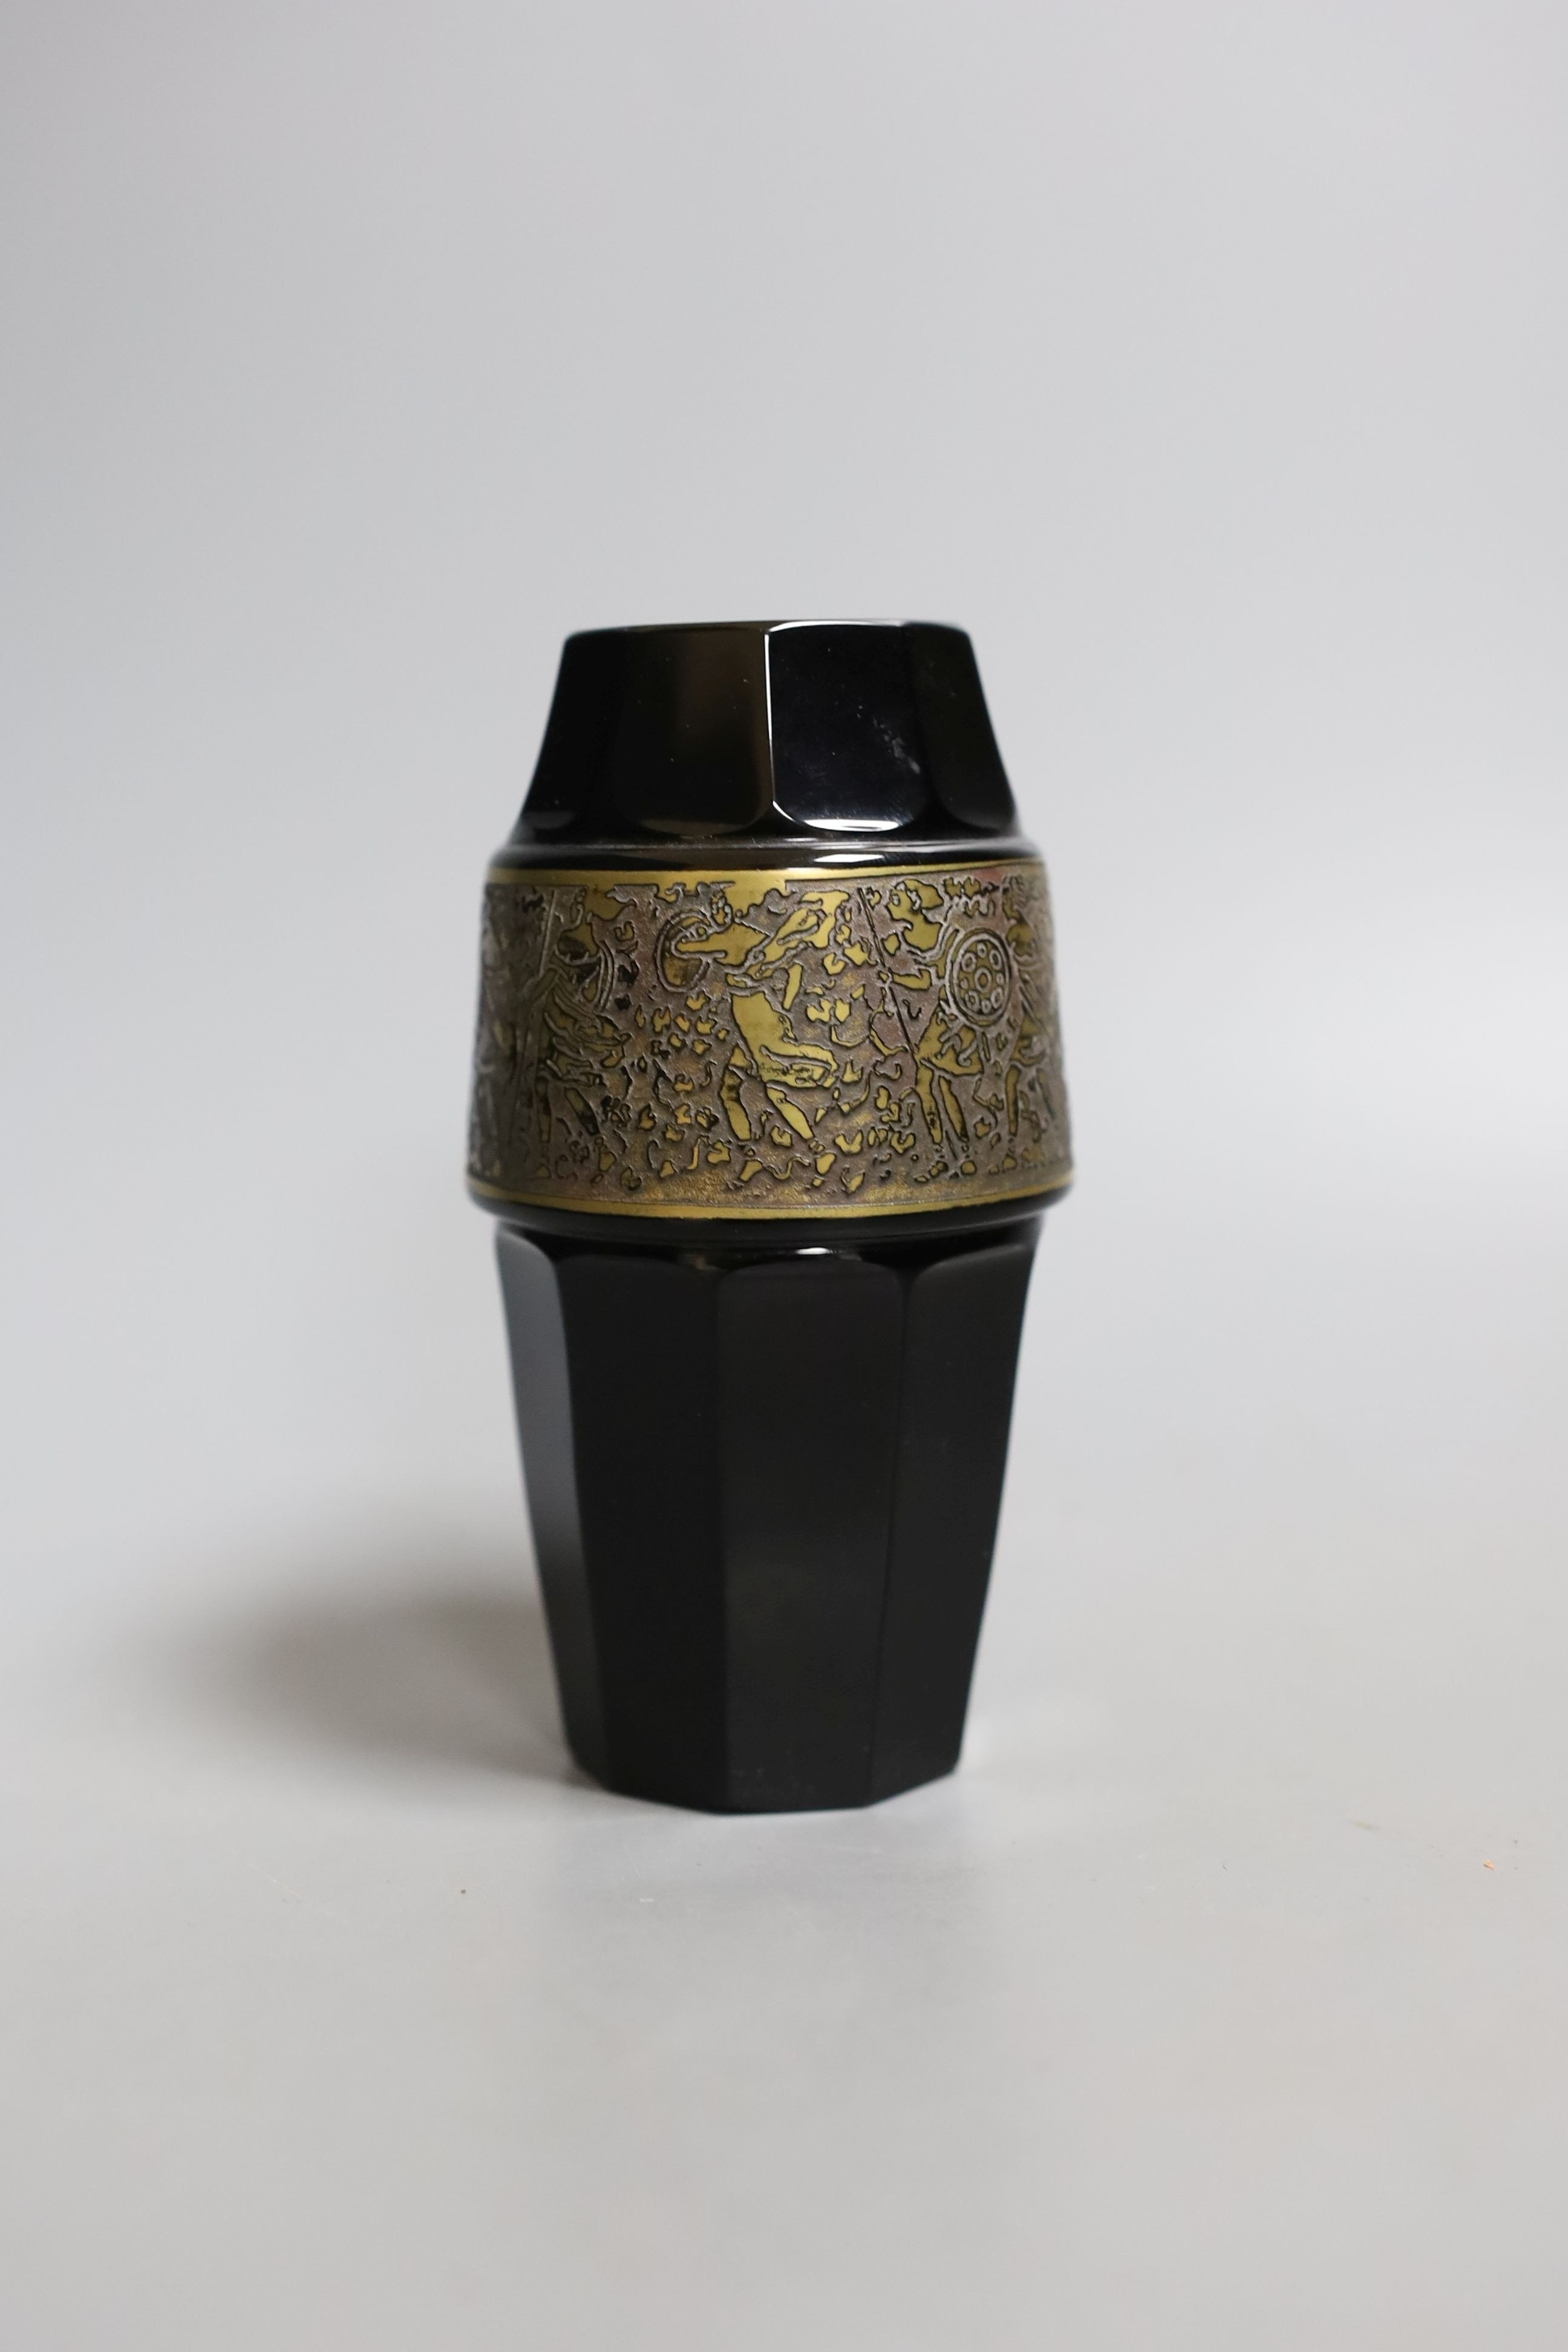 An early 20th century Moser faceted vase - 12.5cm tall - Image 2 of 5